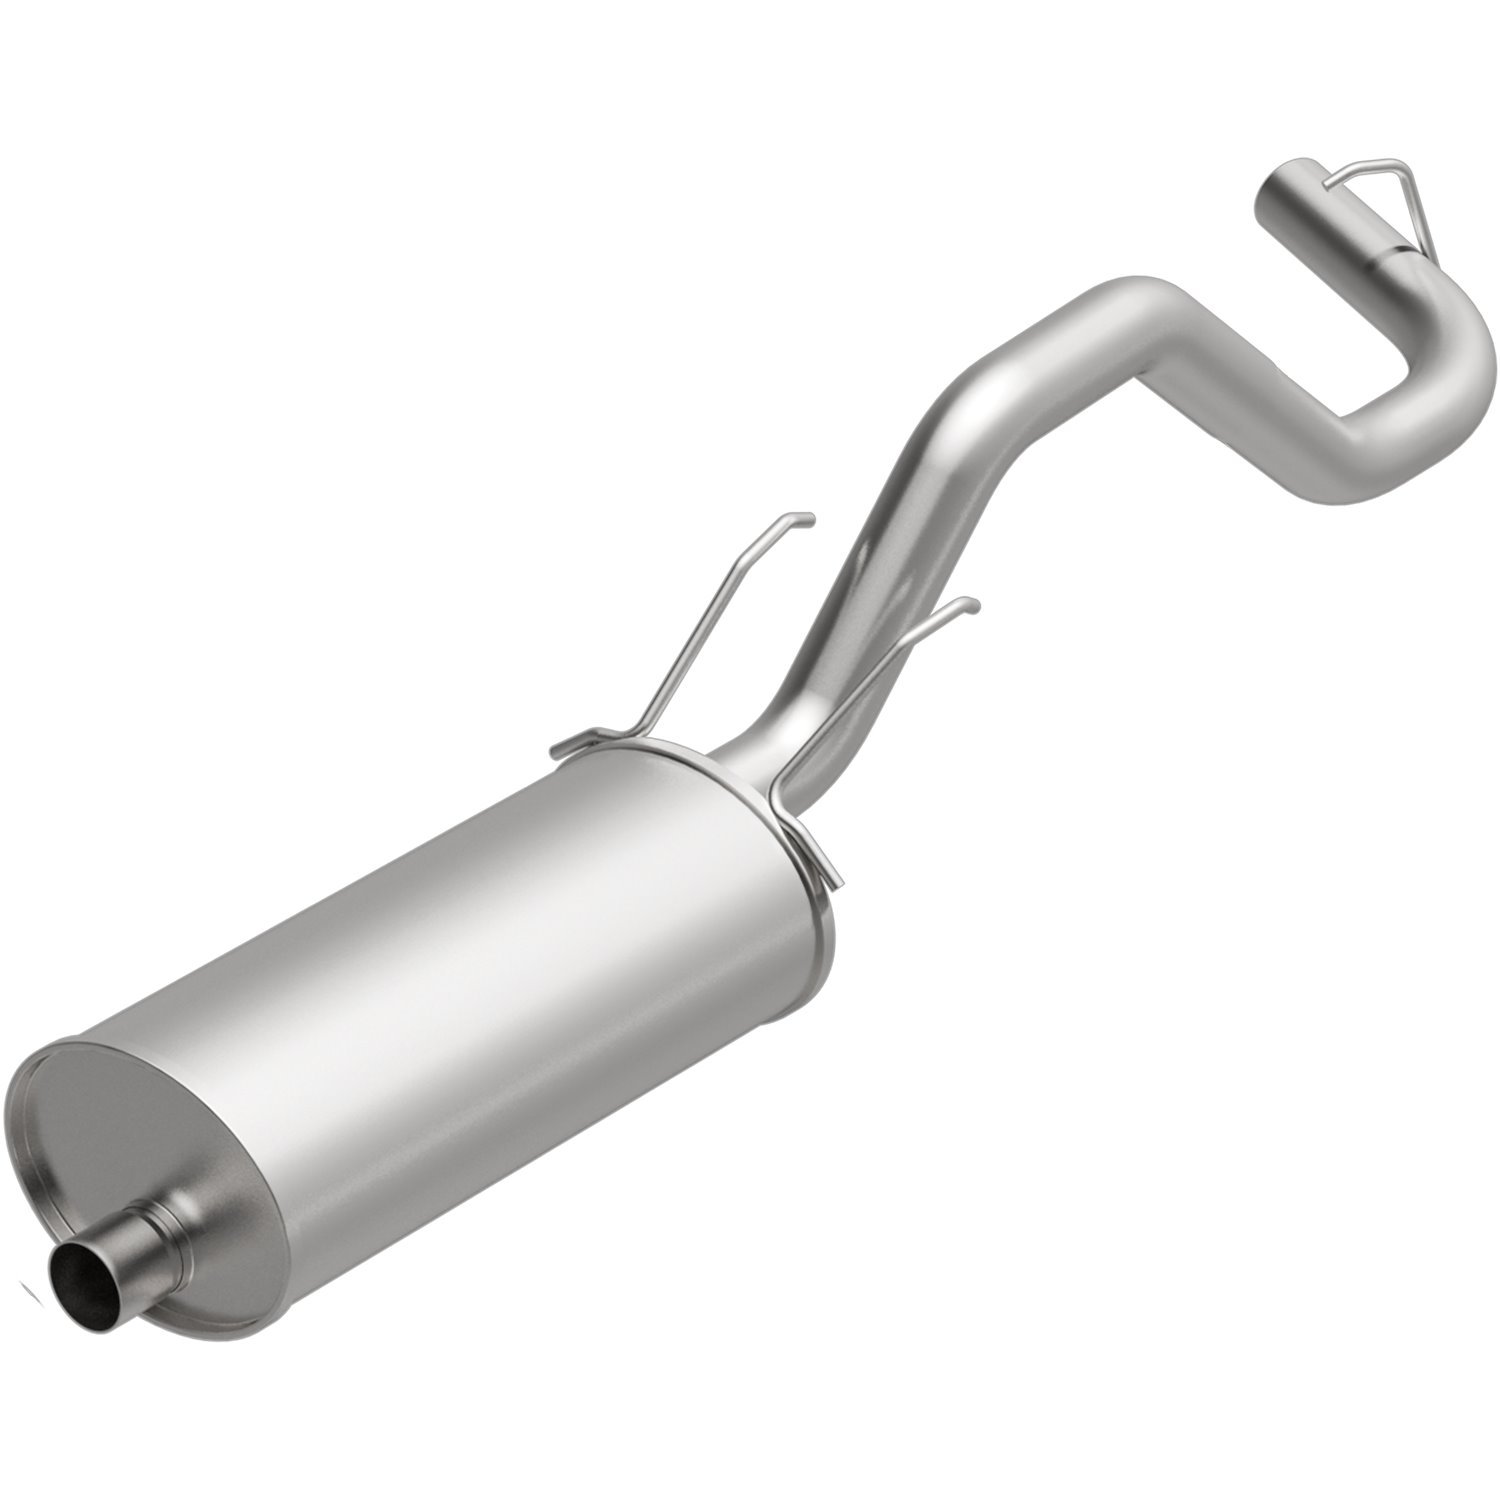 Direct-Fit Exhaust Muffler, 1995-2004 Toyota Tacoma 3.4L